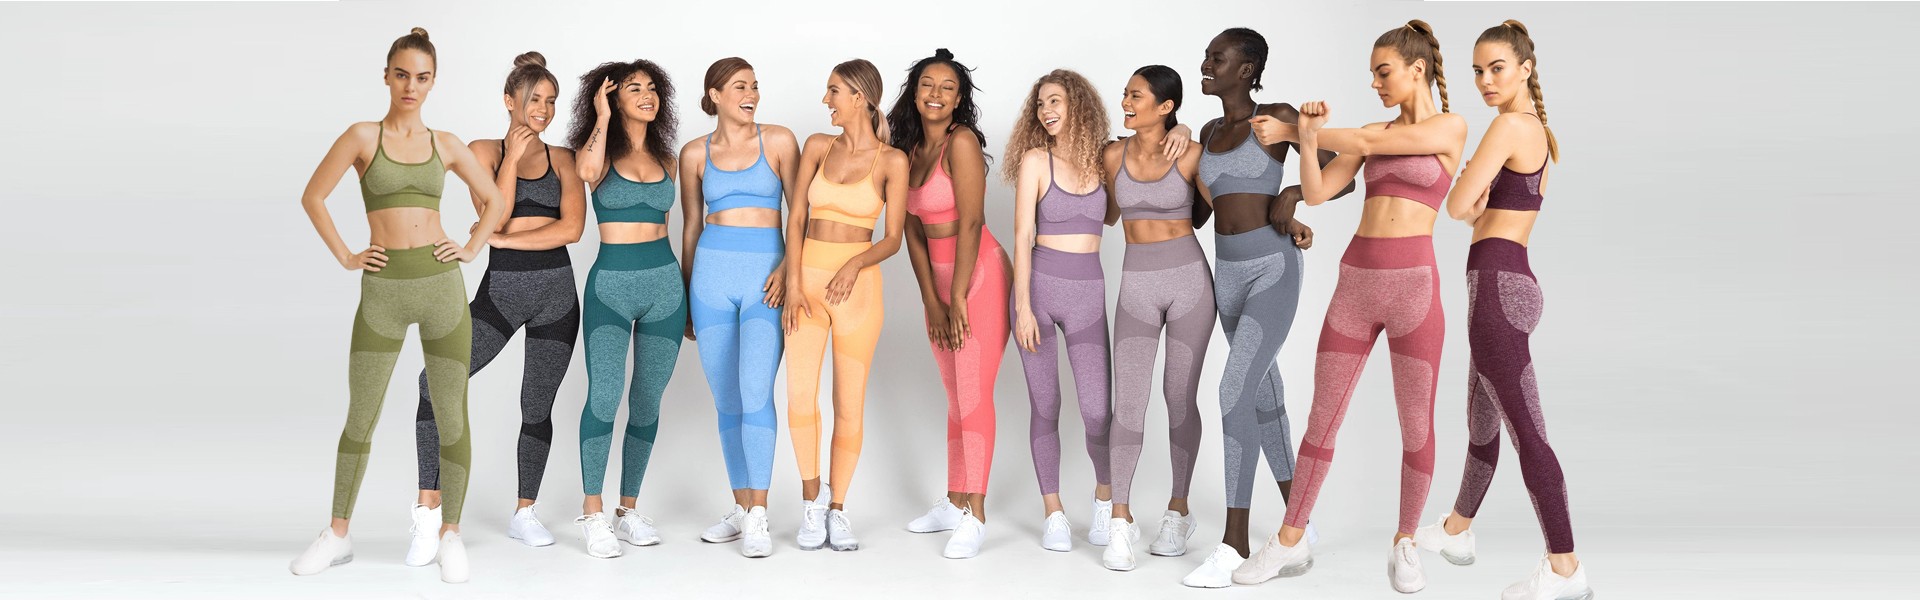 Yoga&Fitness Clothing Is Having a Moment in Fashion in 2020